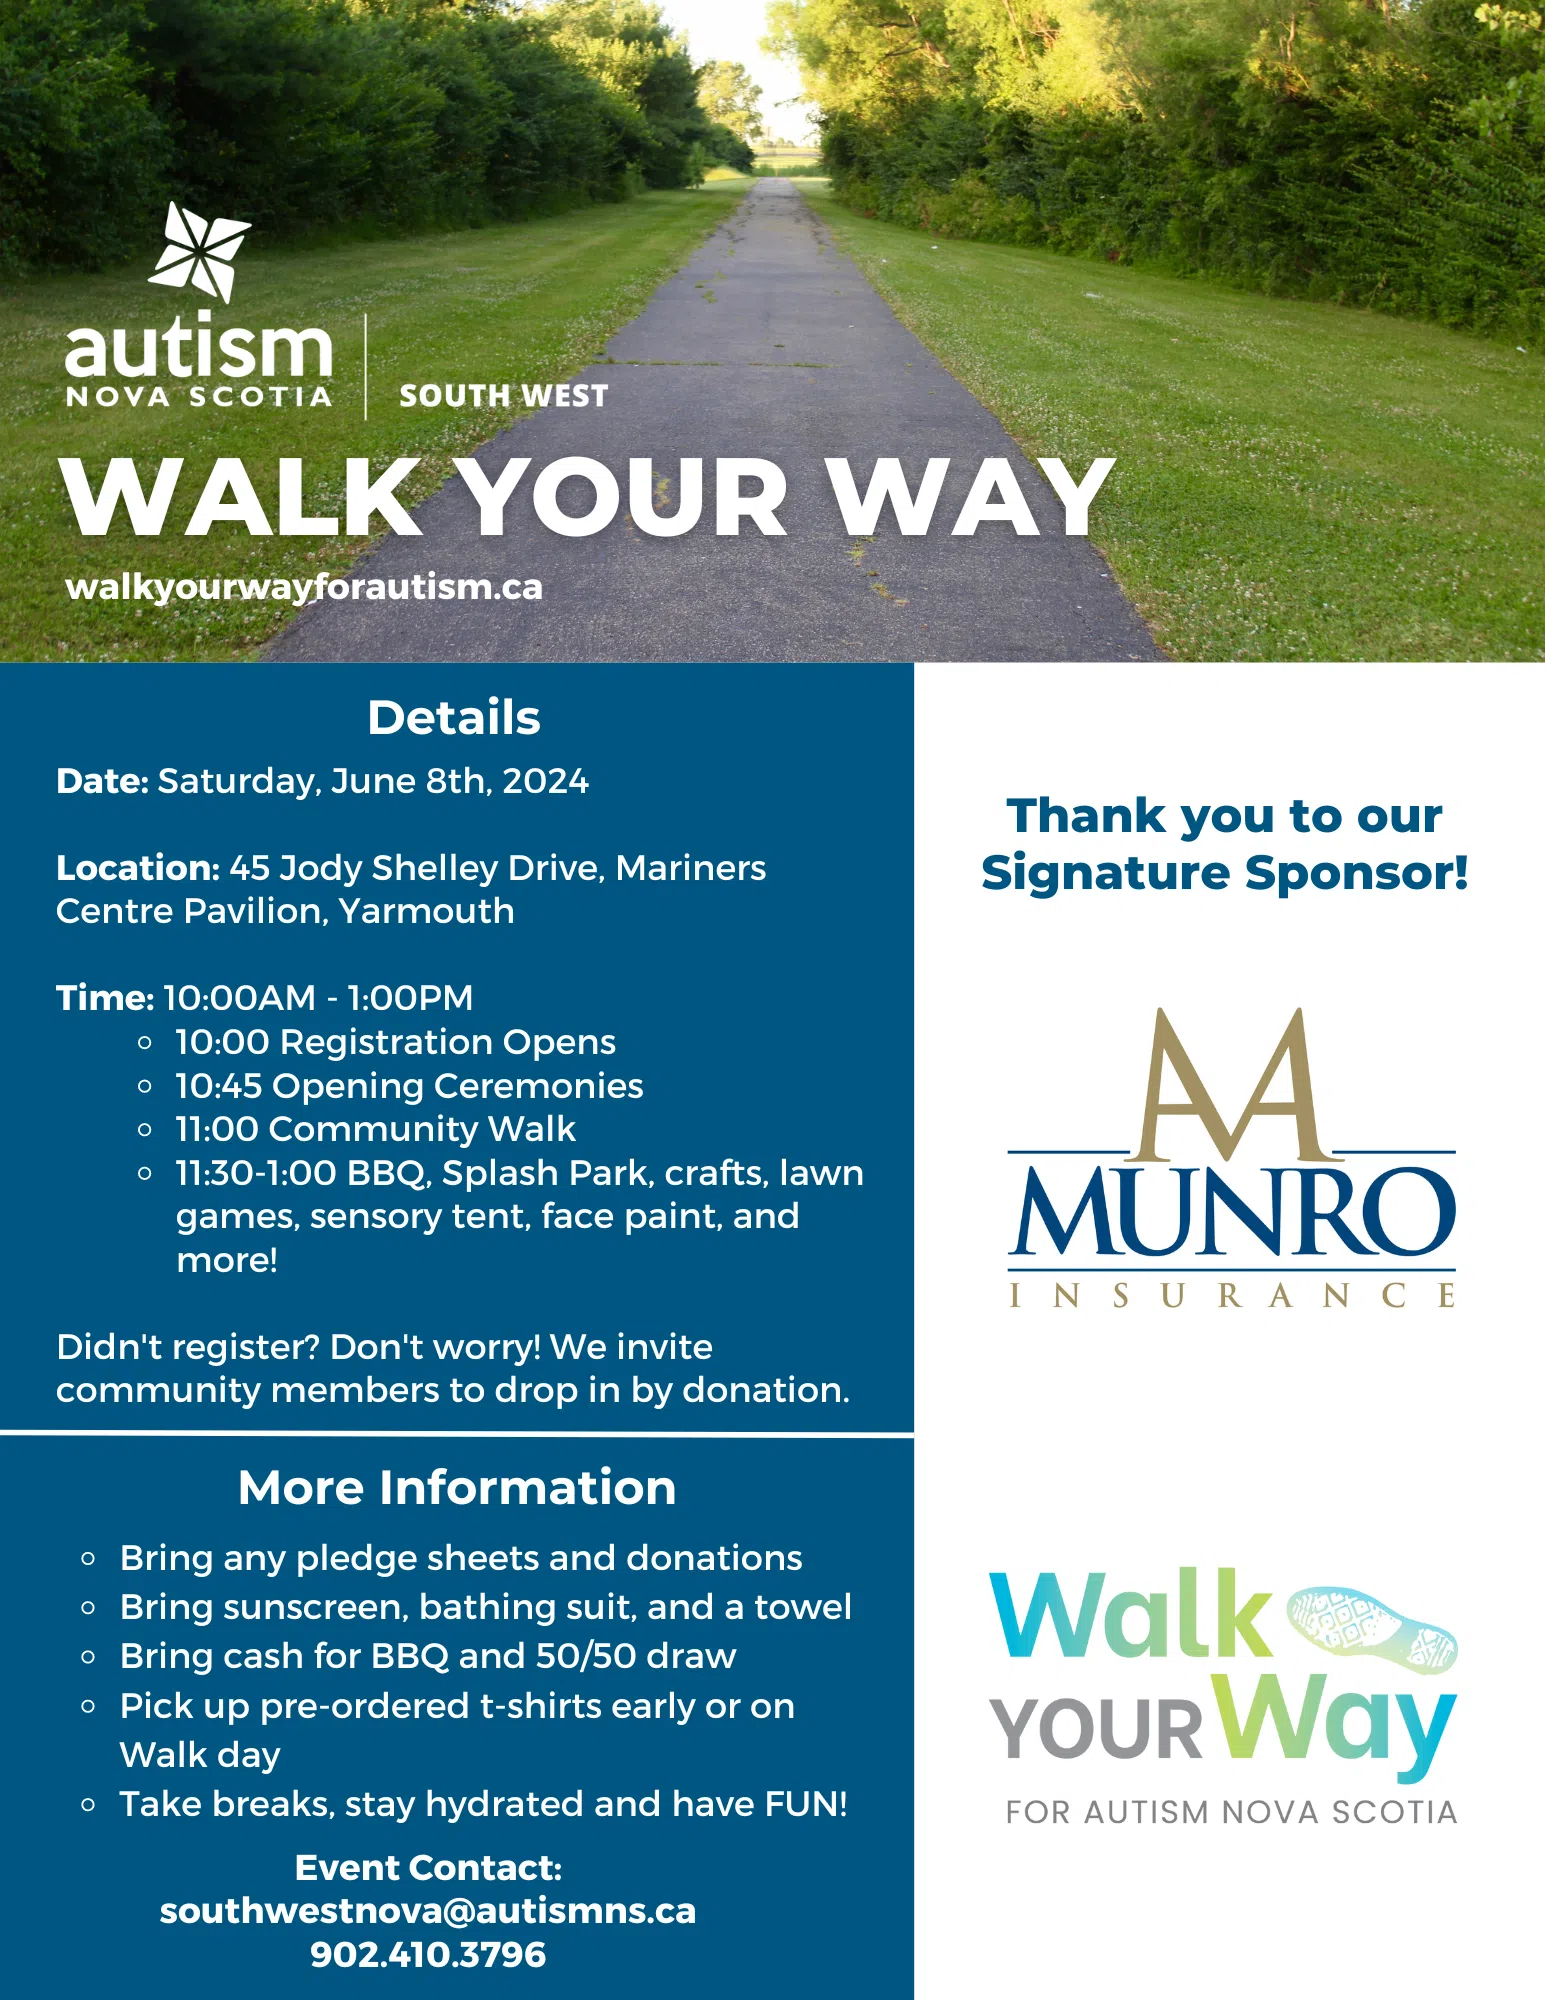 Walk Your Way For Autism Is This Weekend In Yarmouth!